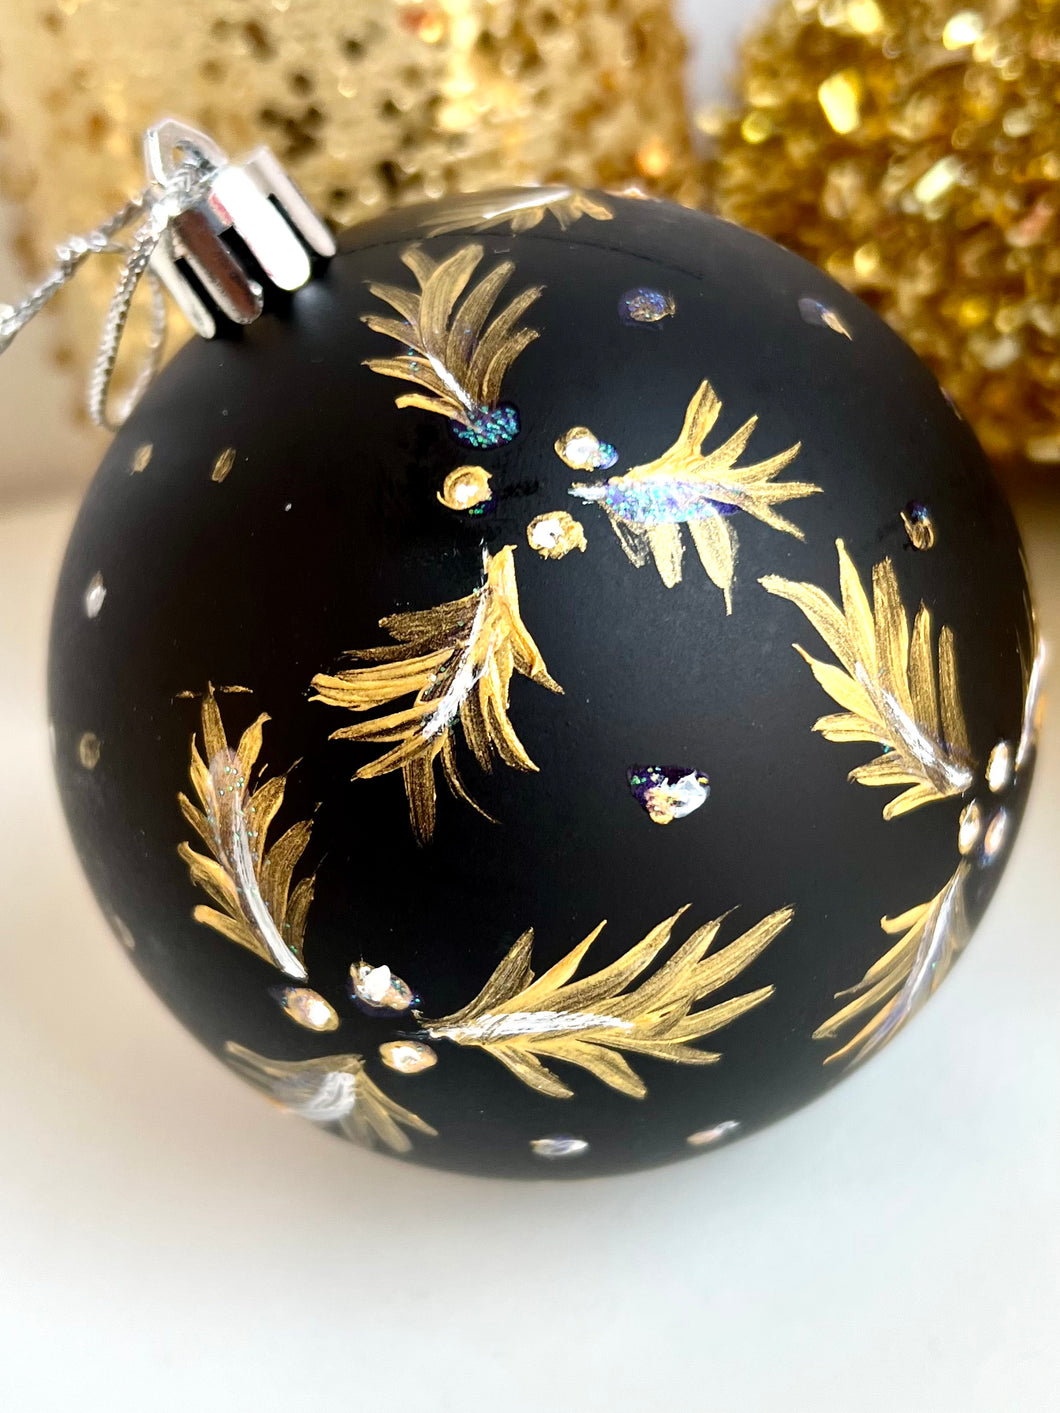 Black Christmas ornament hand painted with gold and white holly leaves and berries